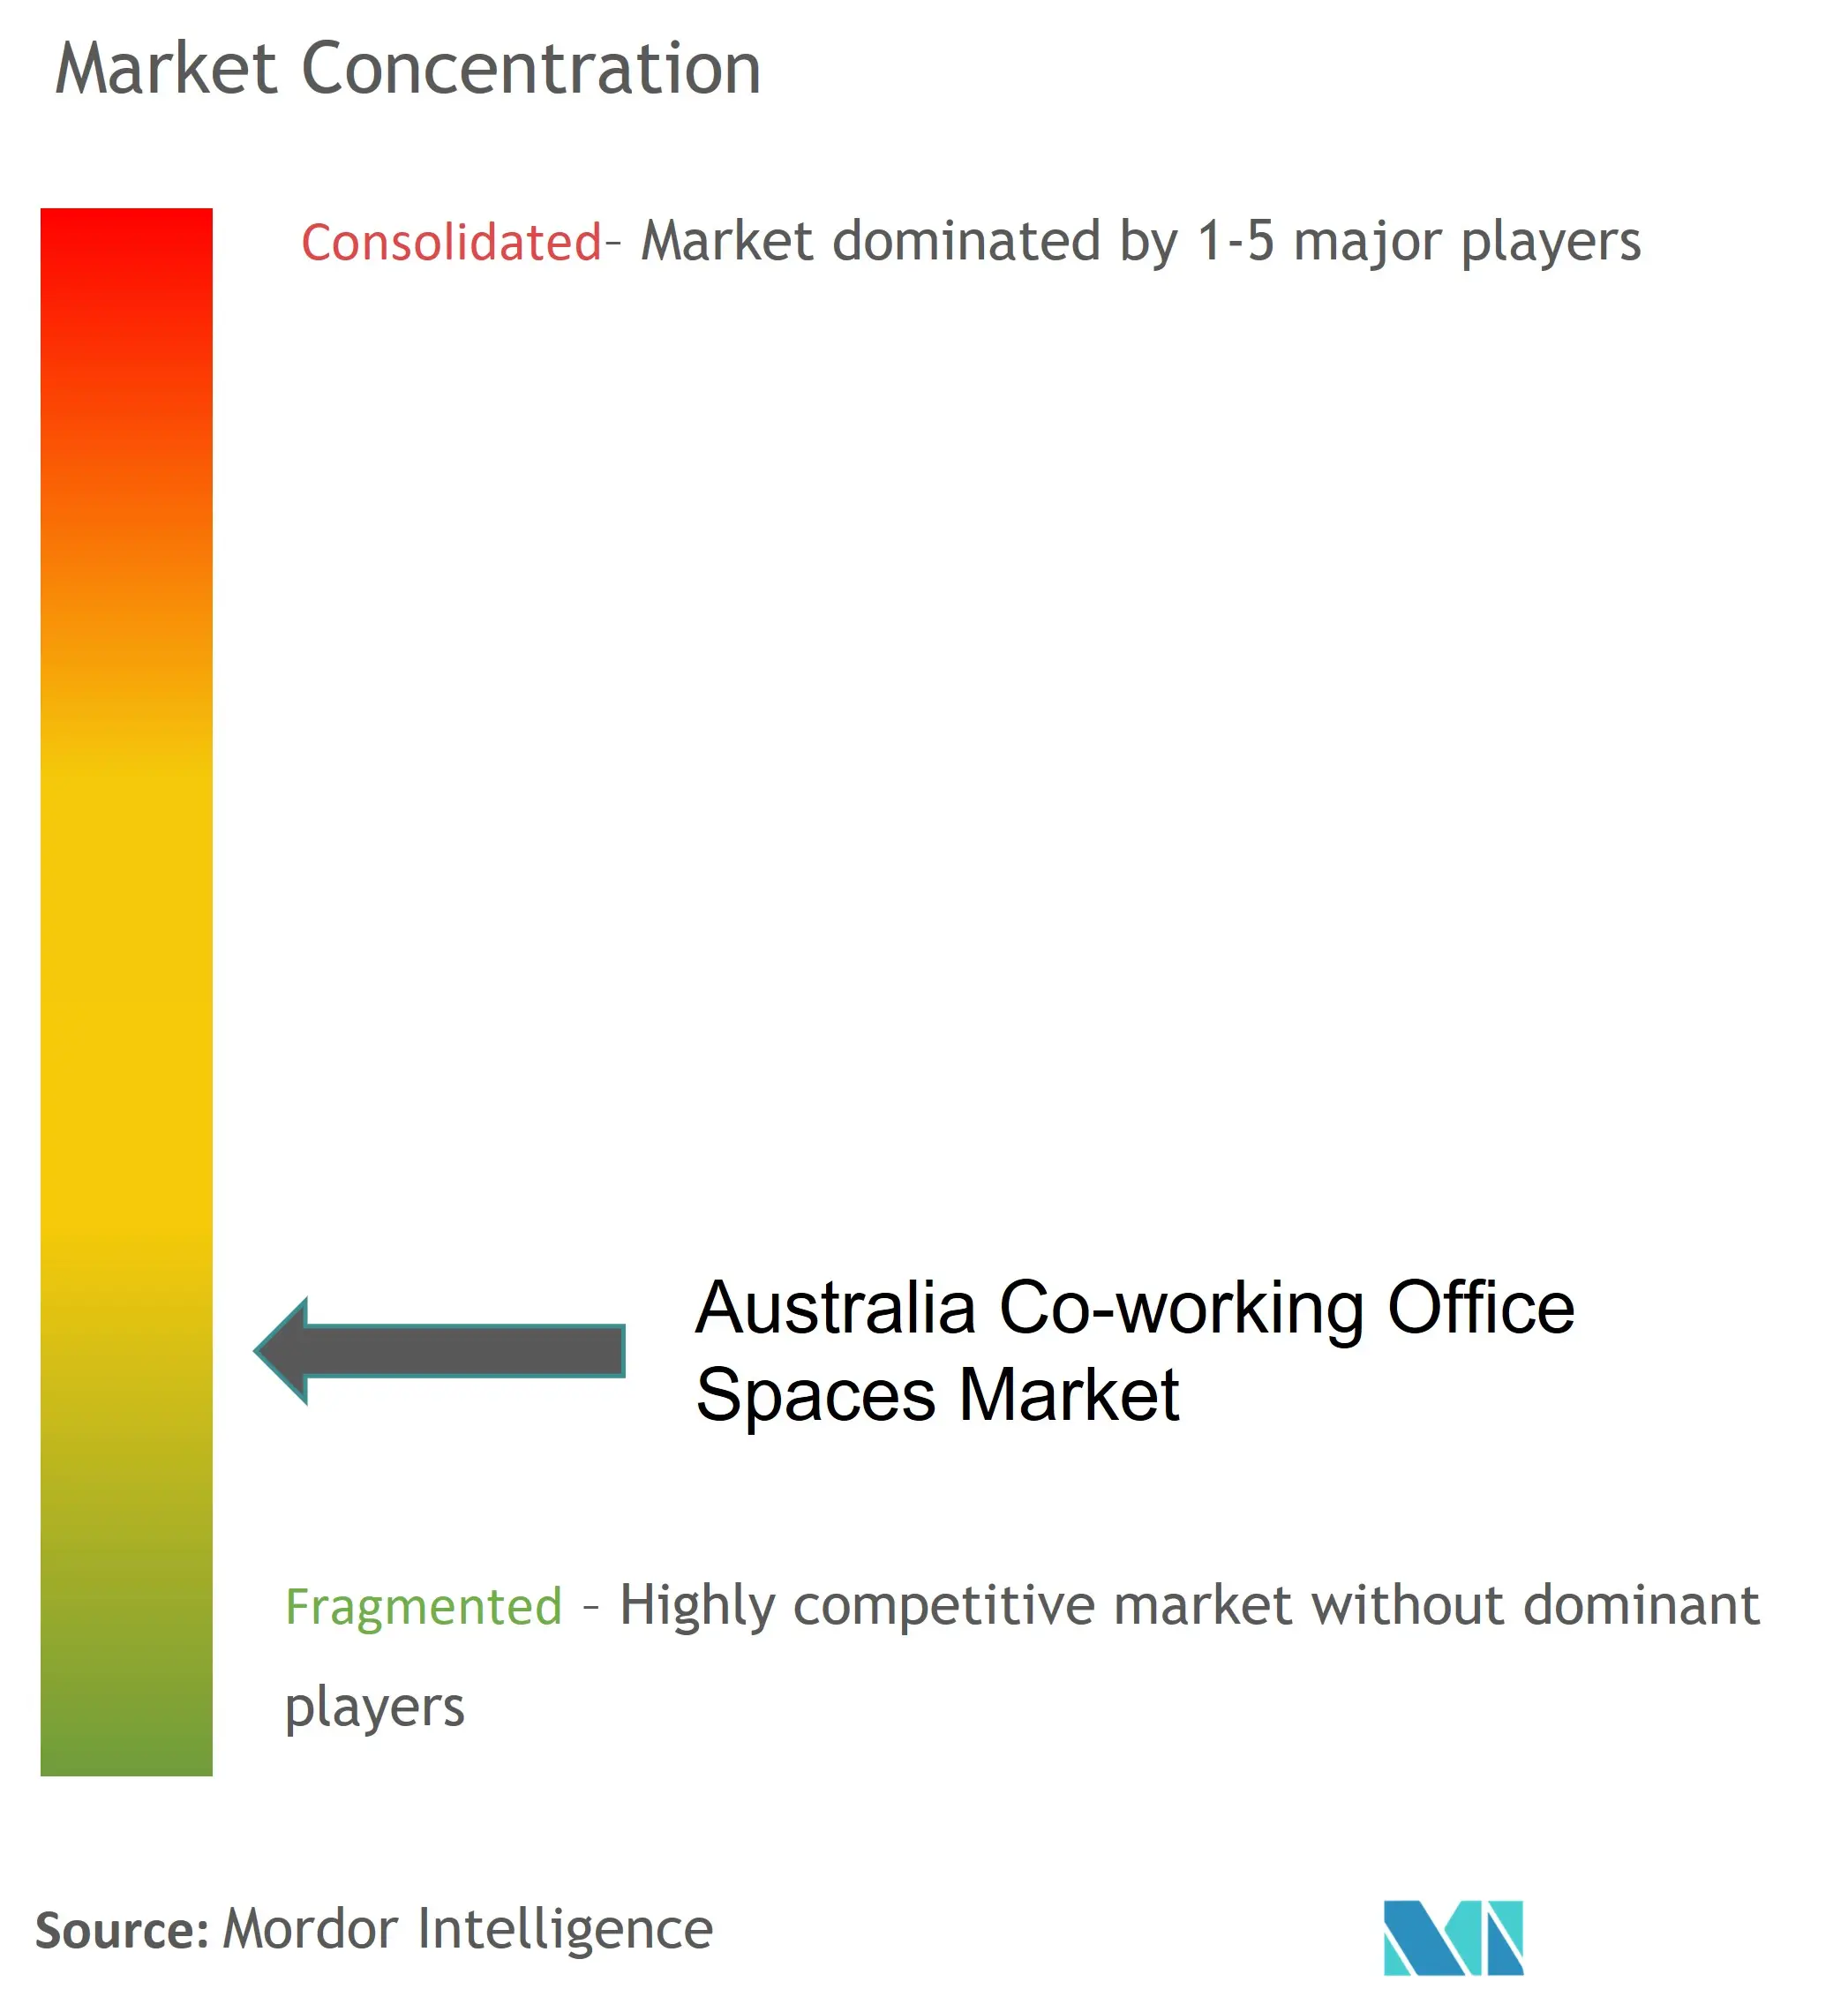 Australia Co-working Office Spaces Market Concentration